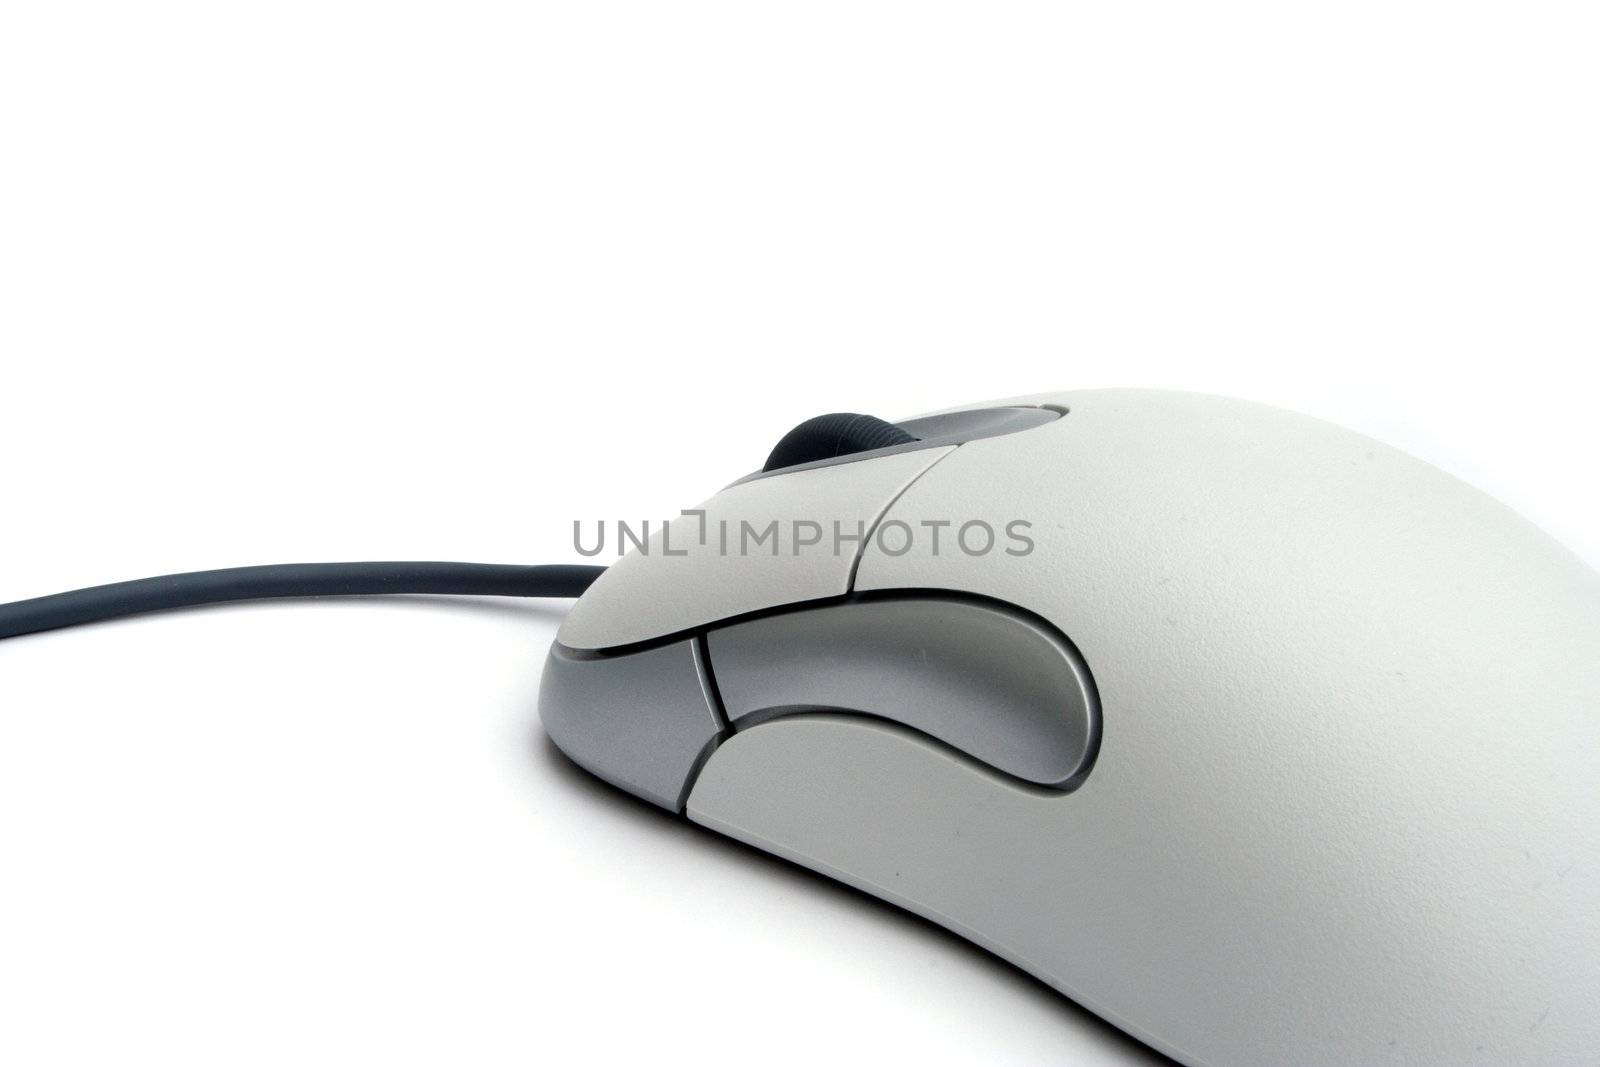 A typical computer mouse. All isolated on white background.